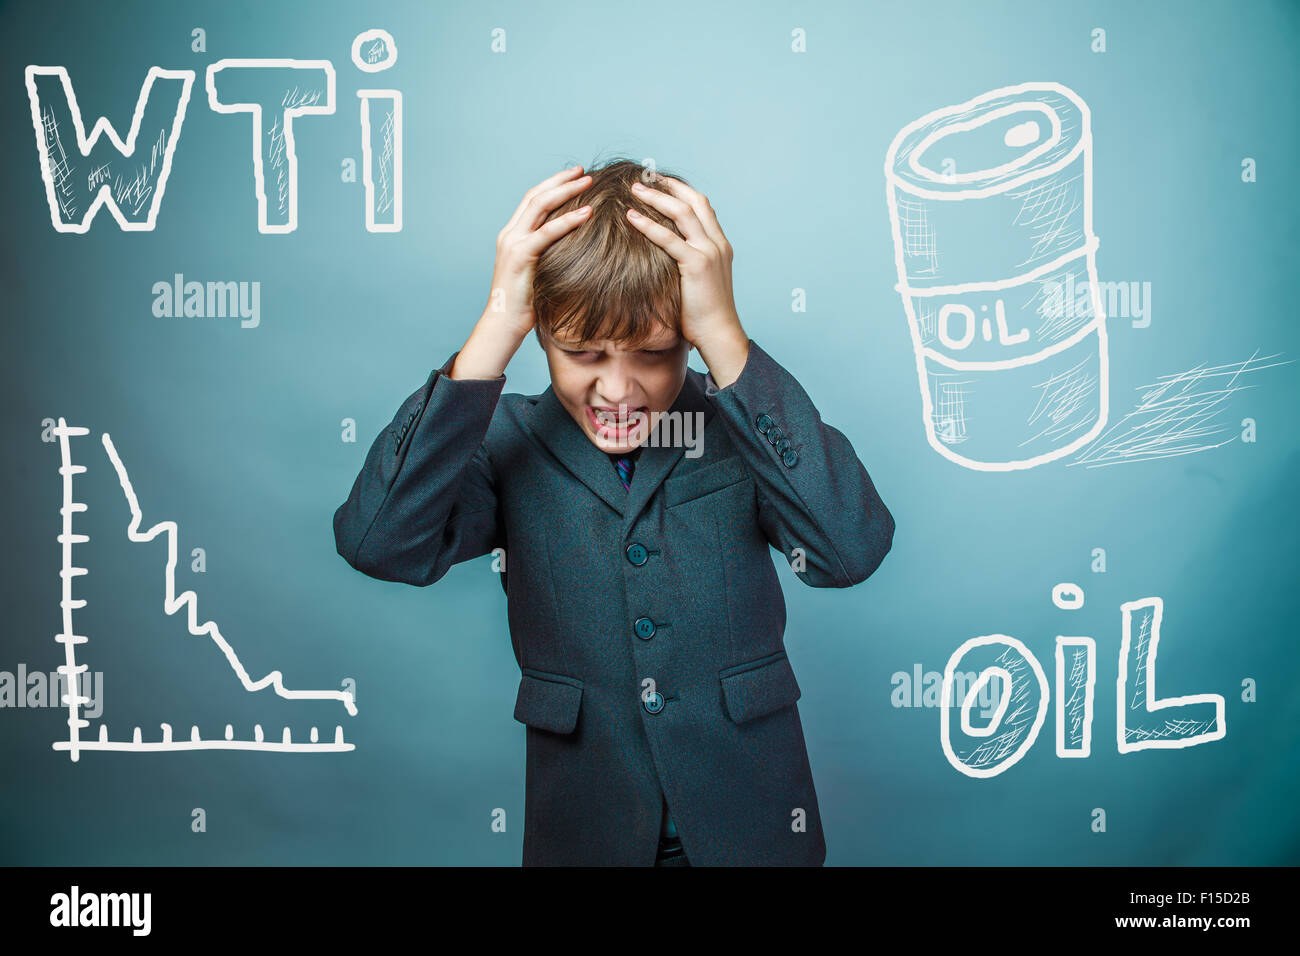 drop in the price of oil barrel WTI businessman teenager holding Stock Photo